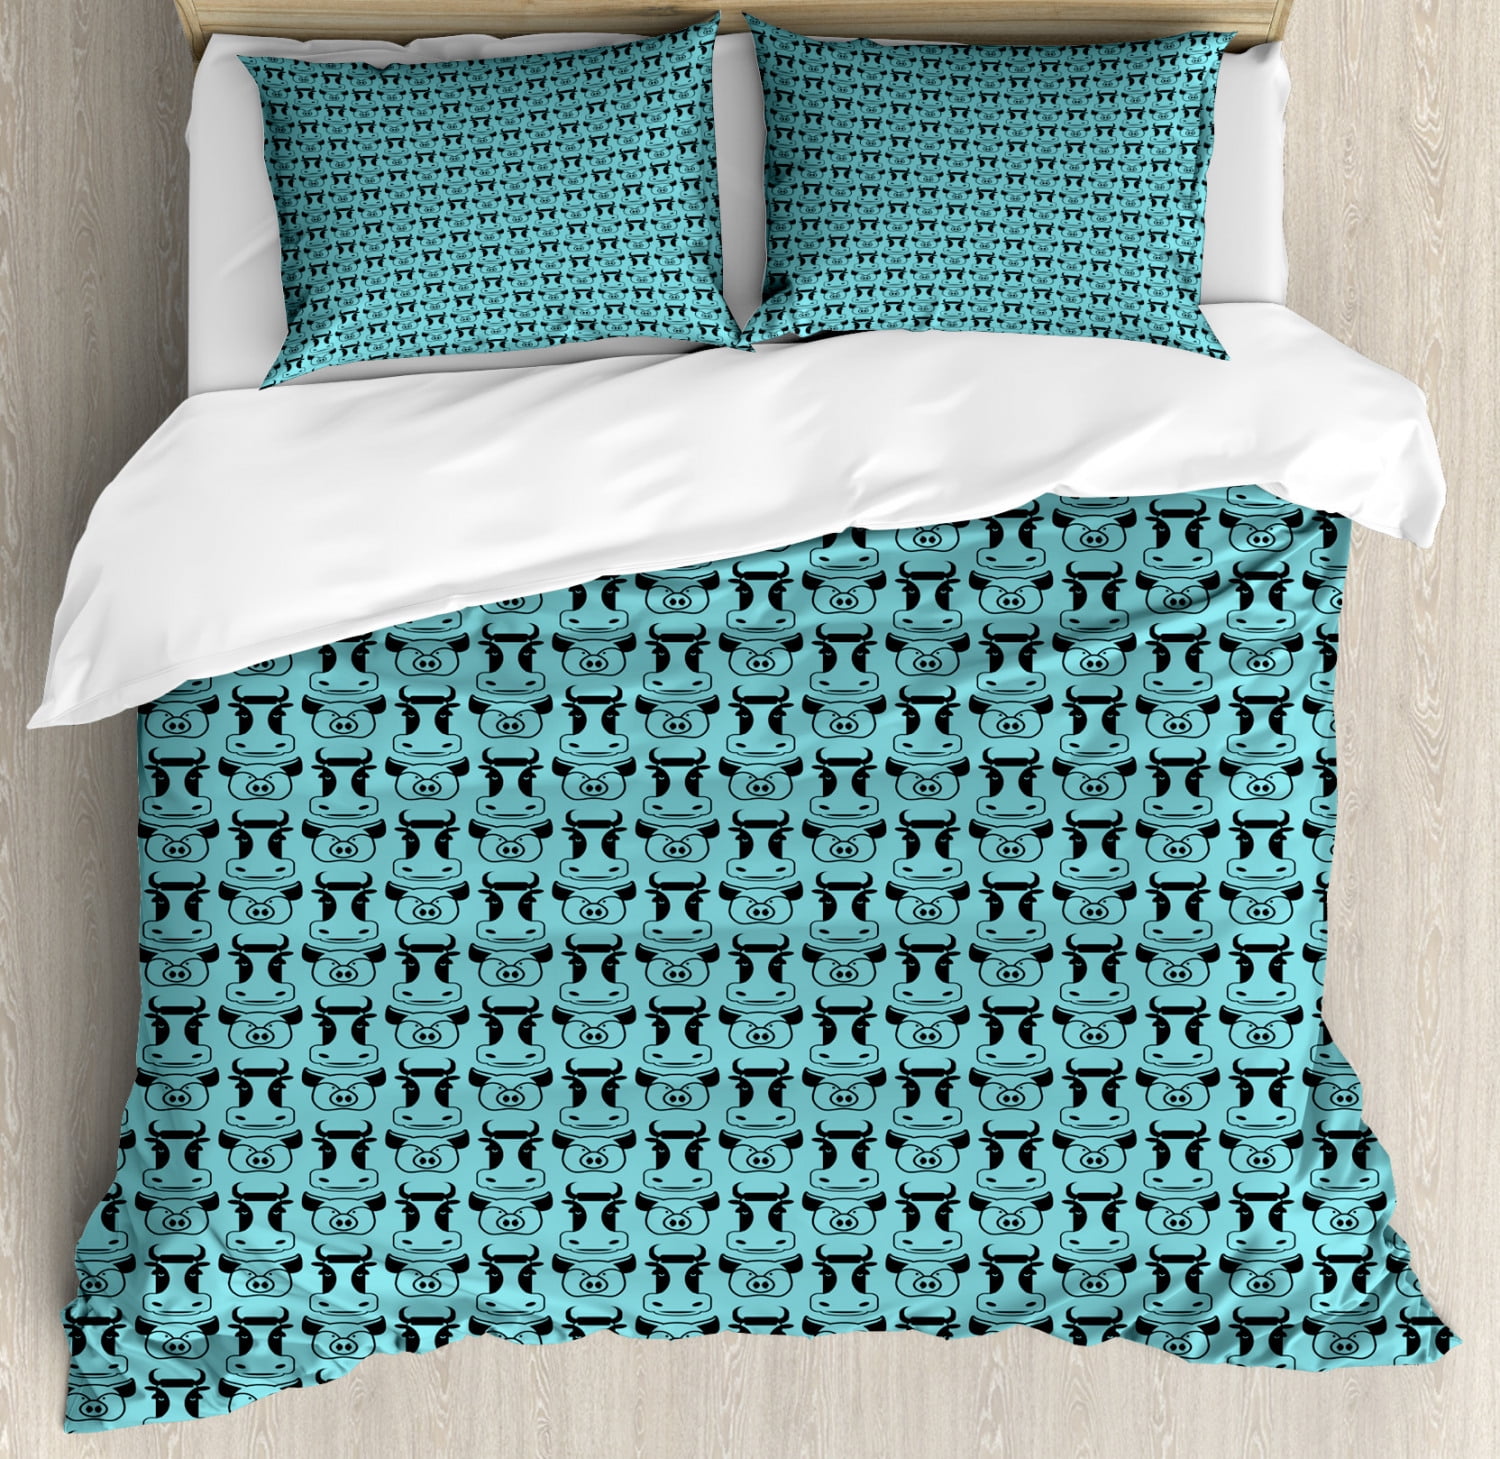 Blue And Black Duvet Cover Set King Size Cow And Pig Pattern Head